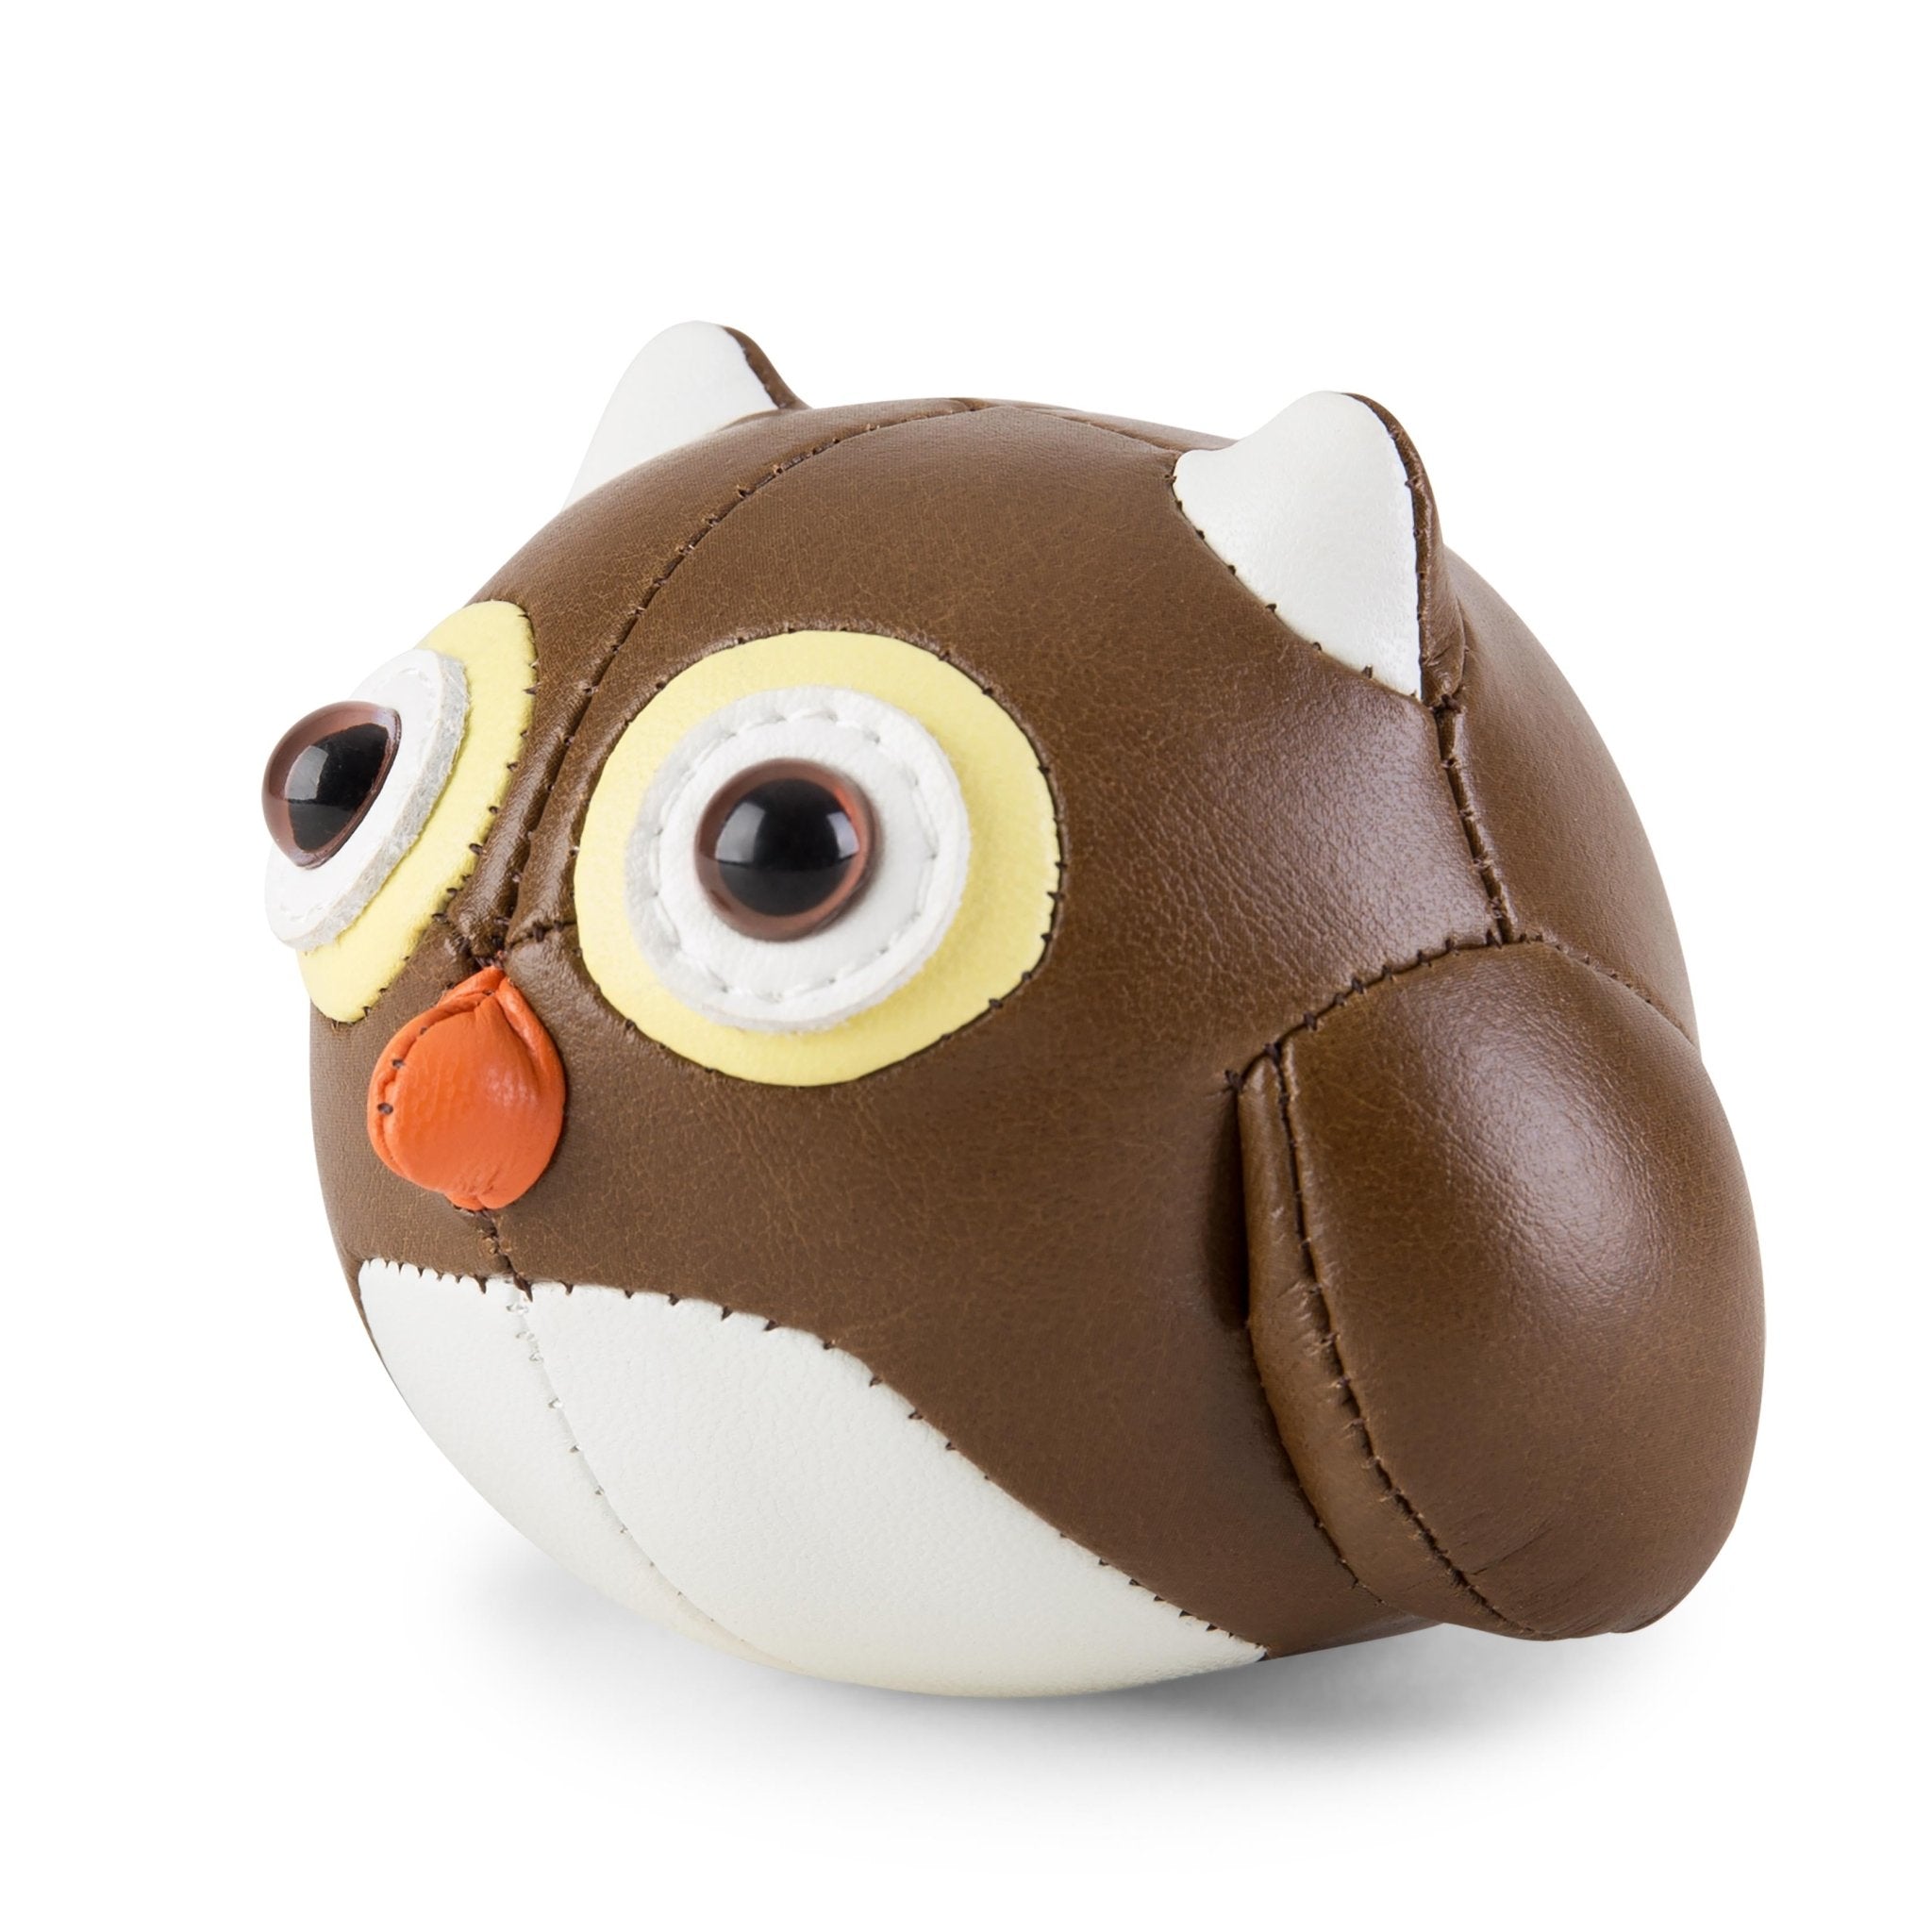 Zuny Owl Paperweight,Brown + White - Intent